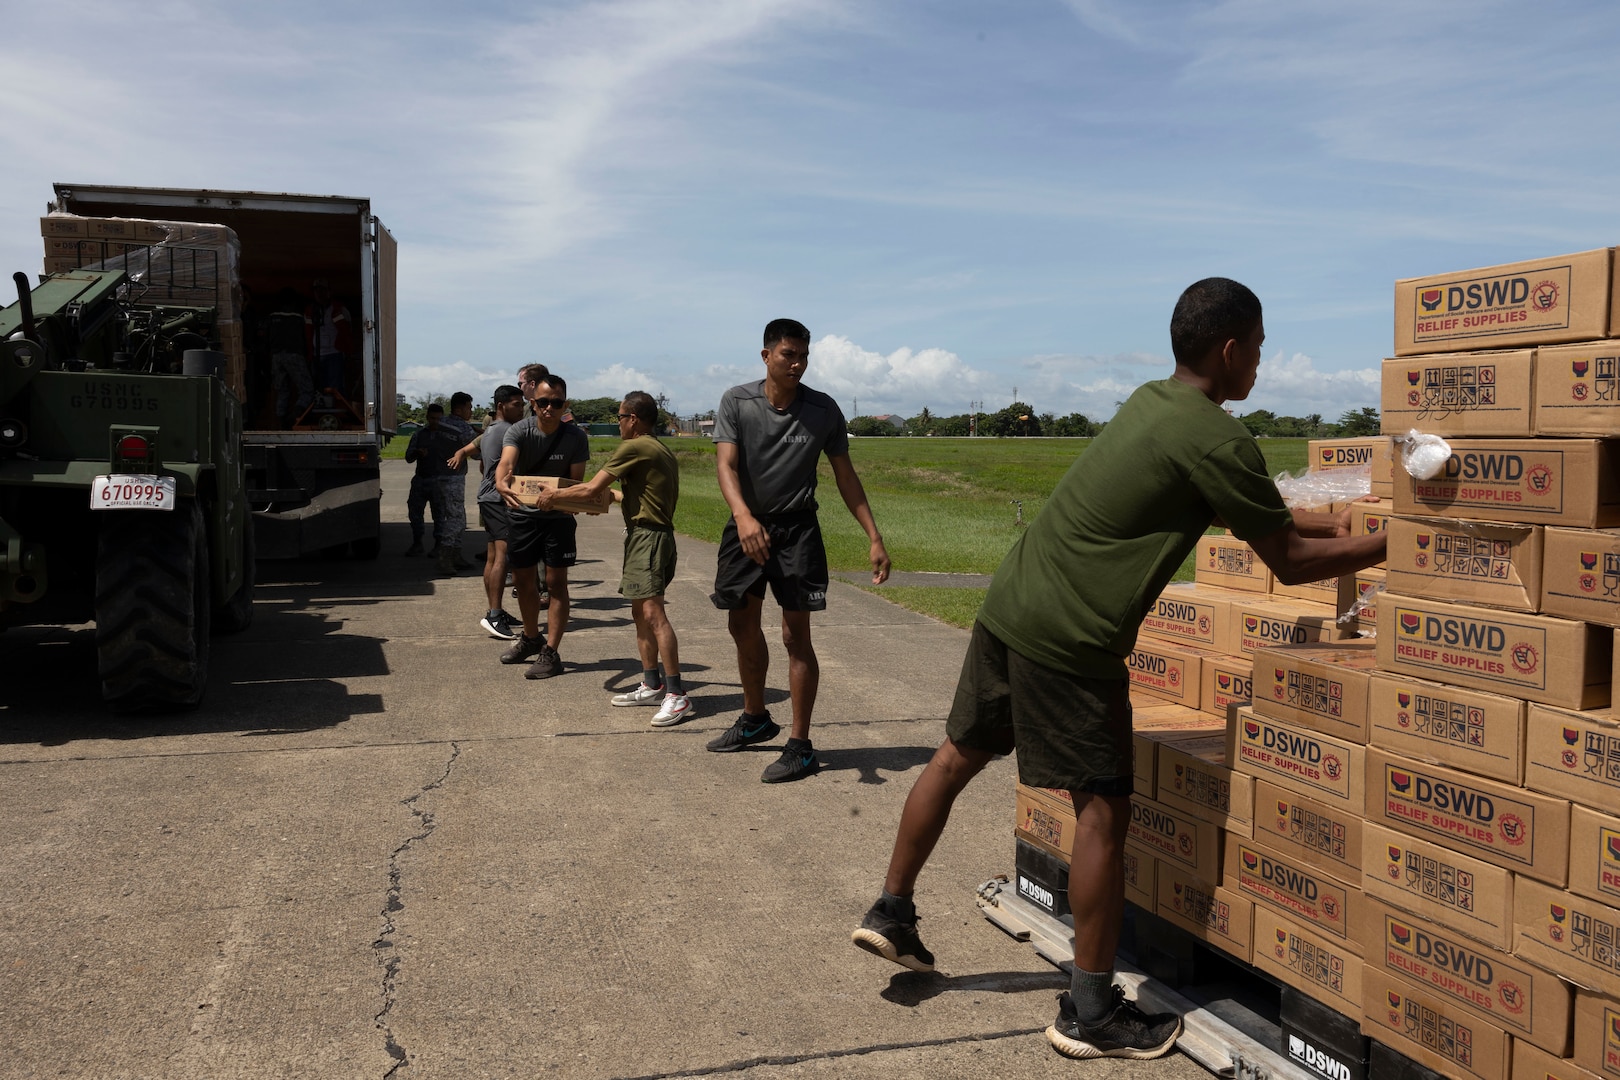 U.S. Marines with Marine Aerial Refueler Transport Squadron 152, 1st Marine Aircraft Wing, alongside Philippine Air Force service members load Department of Social Welfare and Development family food packs onto a truck for transportation at Davao International Airport, Davao City, Philippines, Feb. 12, 2024. At the request of the Government of the Philippines, the U.S. Marines of III Marine Expeditionary Force are supporting the U.S. Agency for International Development in providing foreign humanitarian assistance to the ongoing disaster relief mission in Mindanao. The forward presence and ready posture of III MEF assets in the region facilitated rapid and effective response to crisis, demonstrating the U.S.’s commitment to Allies and partners during times of need. (U.S. Marine Corps photo by Sgt. Savannah Mesimer)